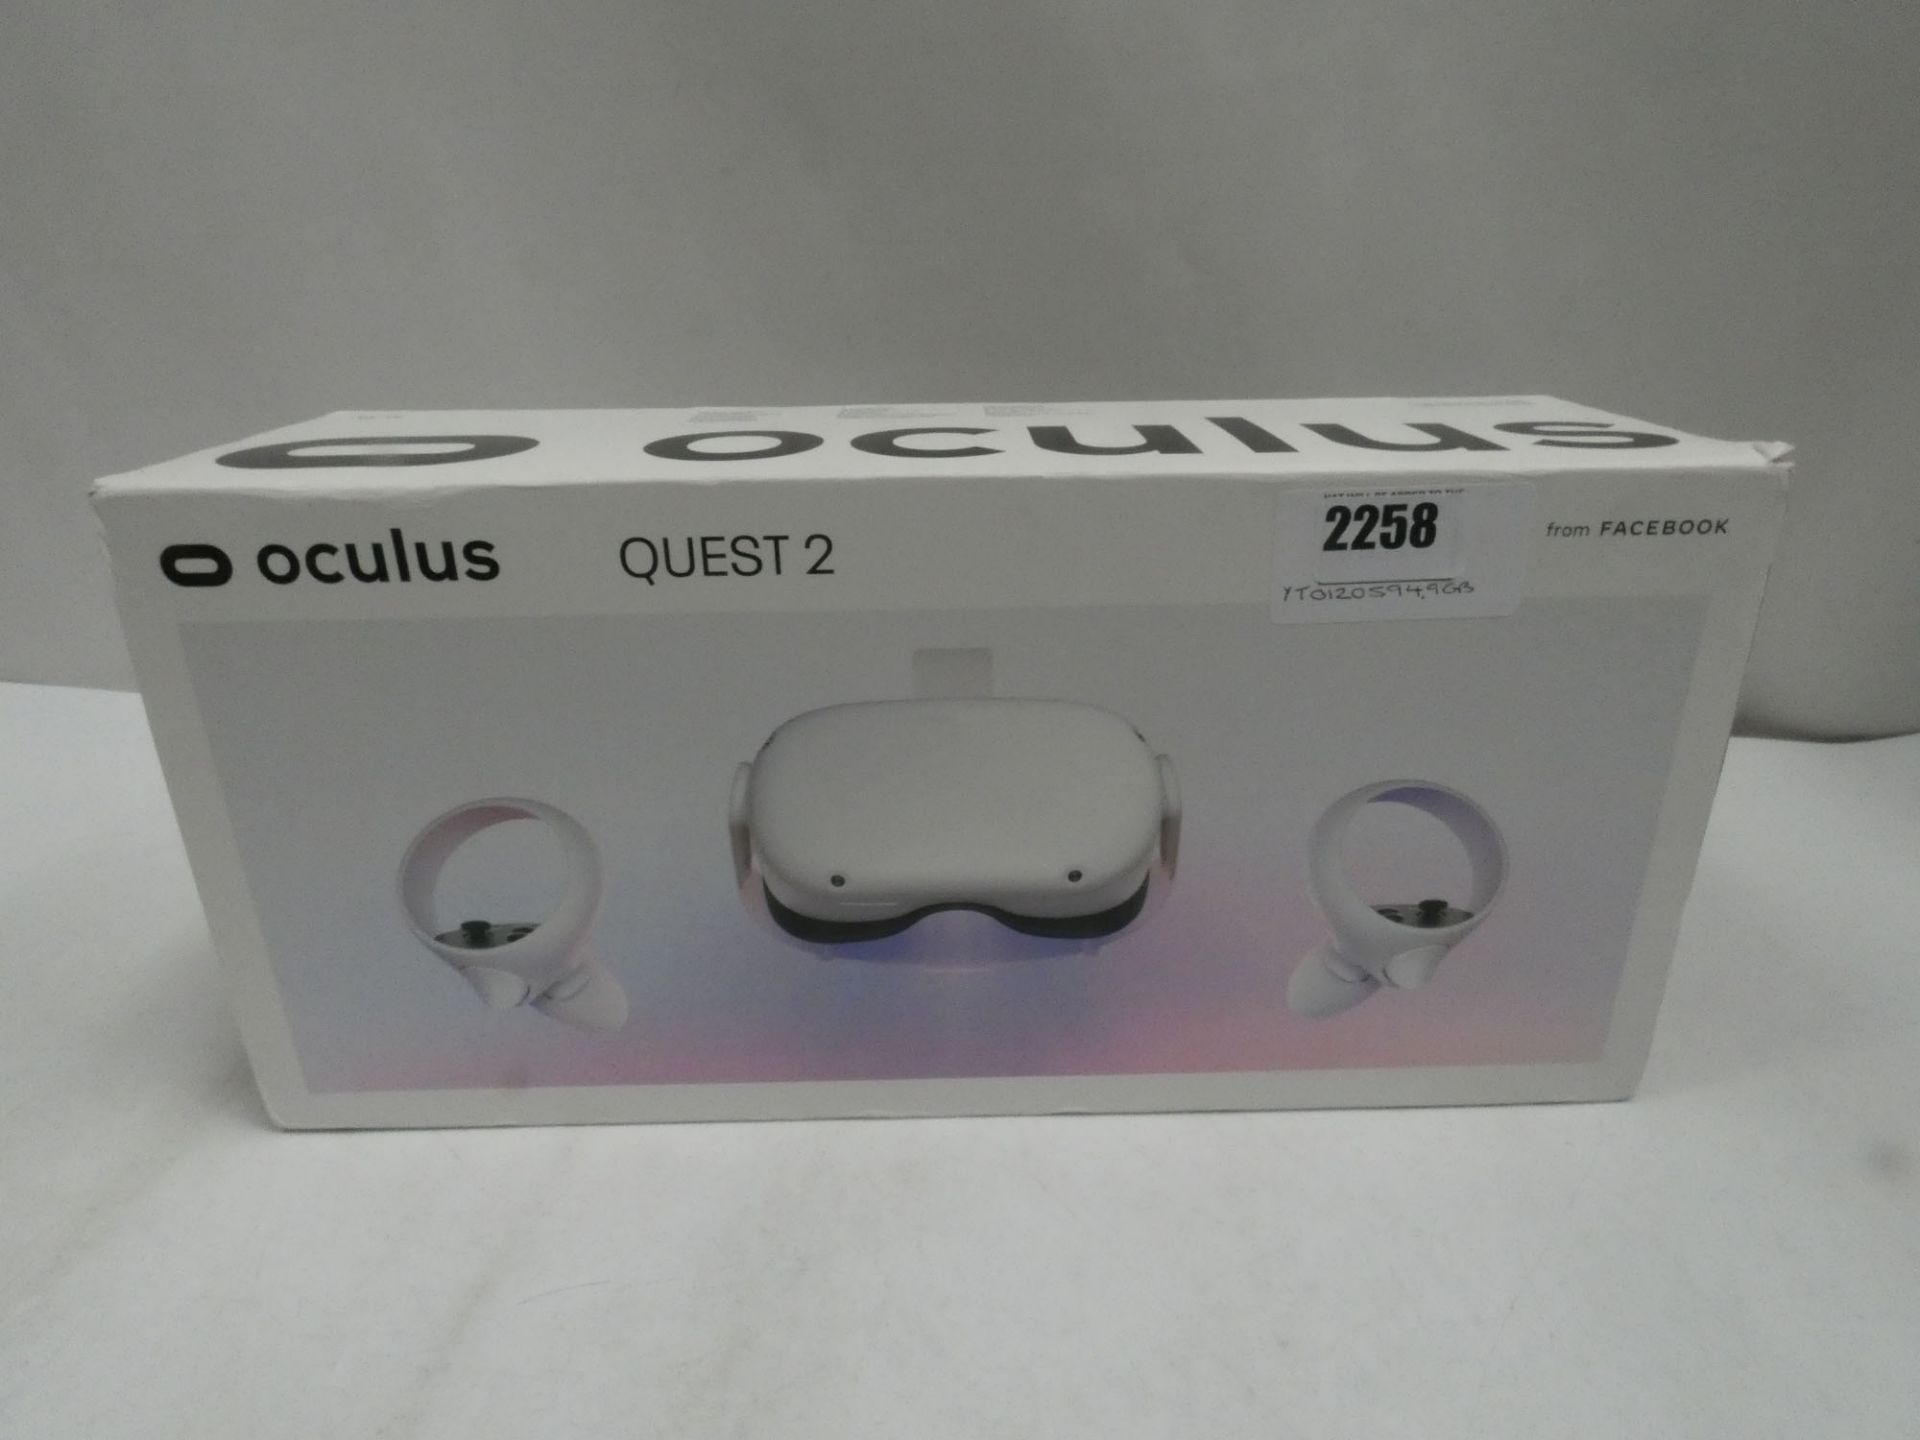 Oculus Quest 2 VR headset and controllers